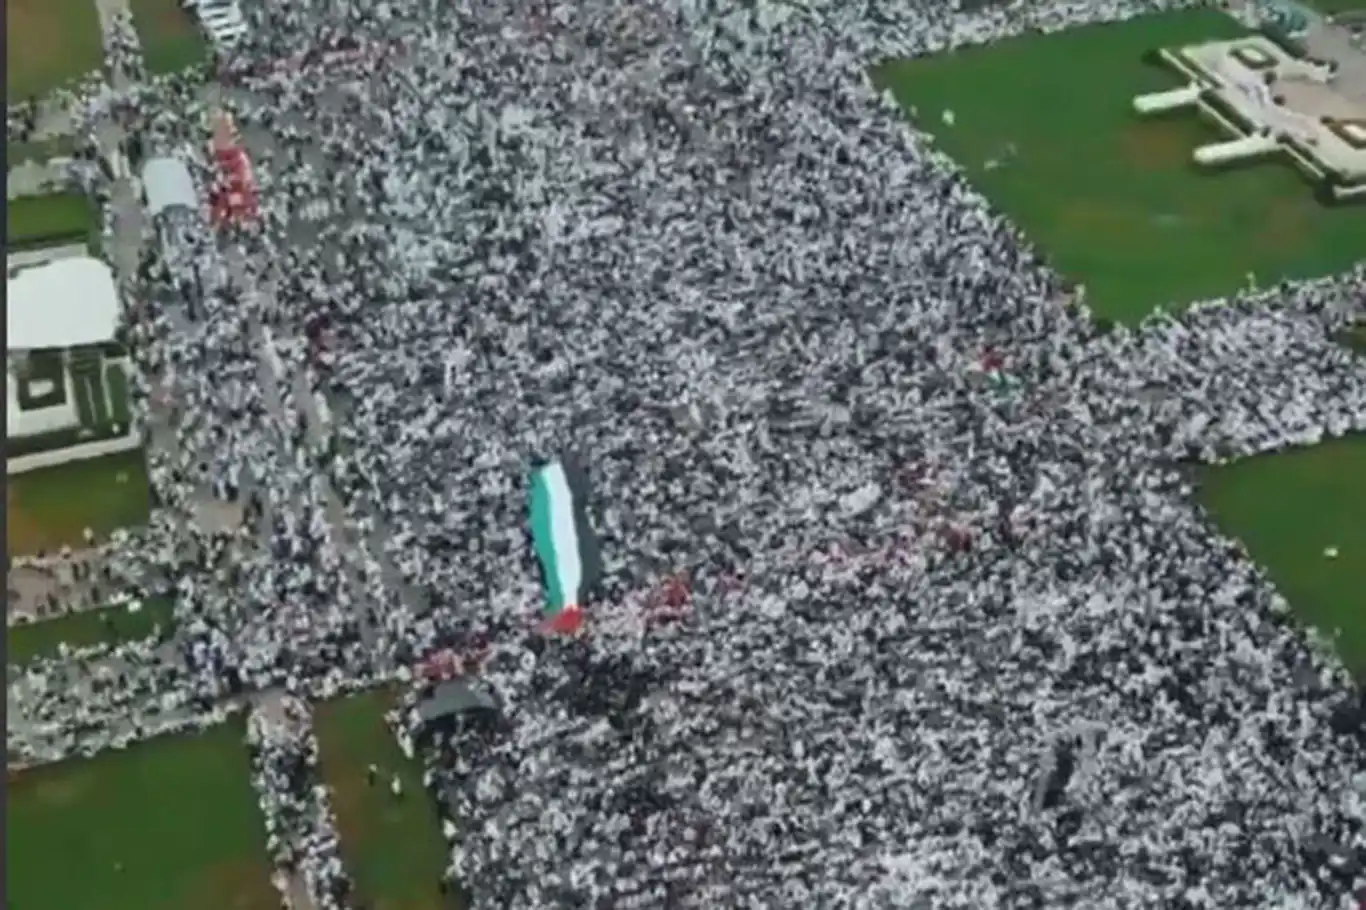 More than 2 million people gather in Indonesia to express solidarity with Gaza